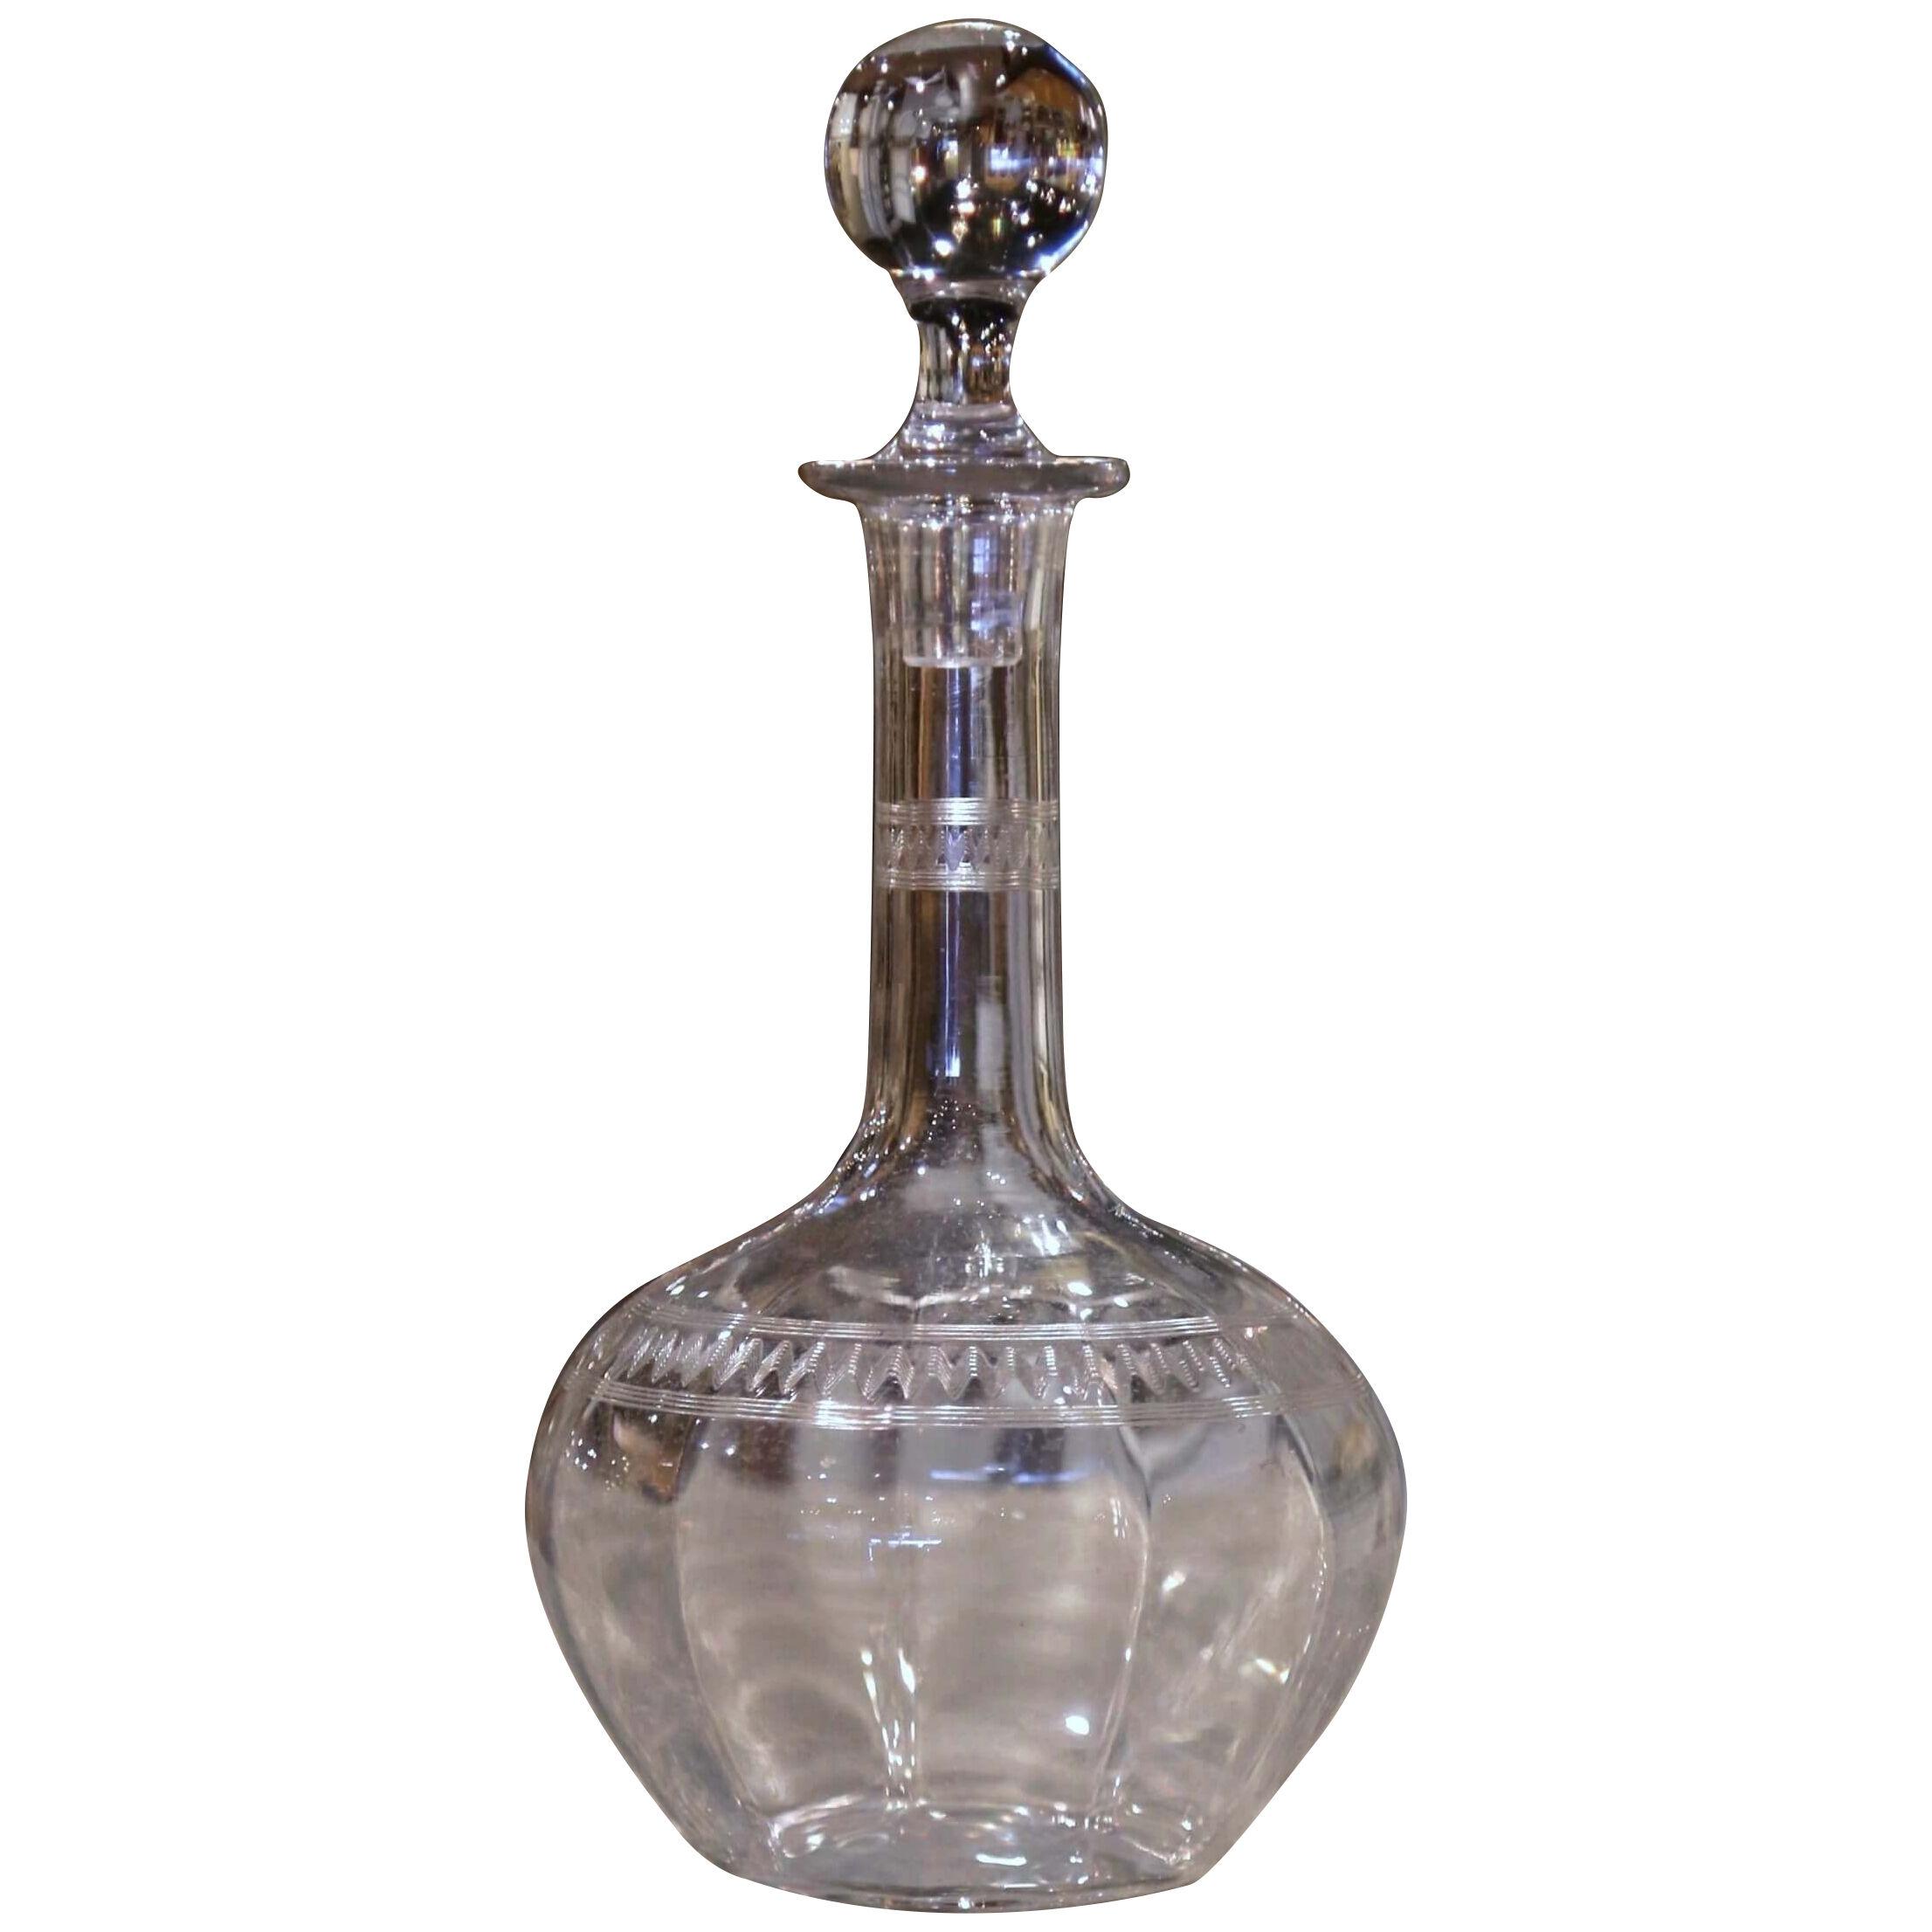 Mid-Century French Glass Wine Carafe Decanter with Stopper